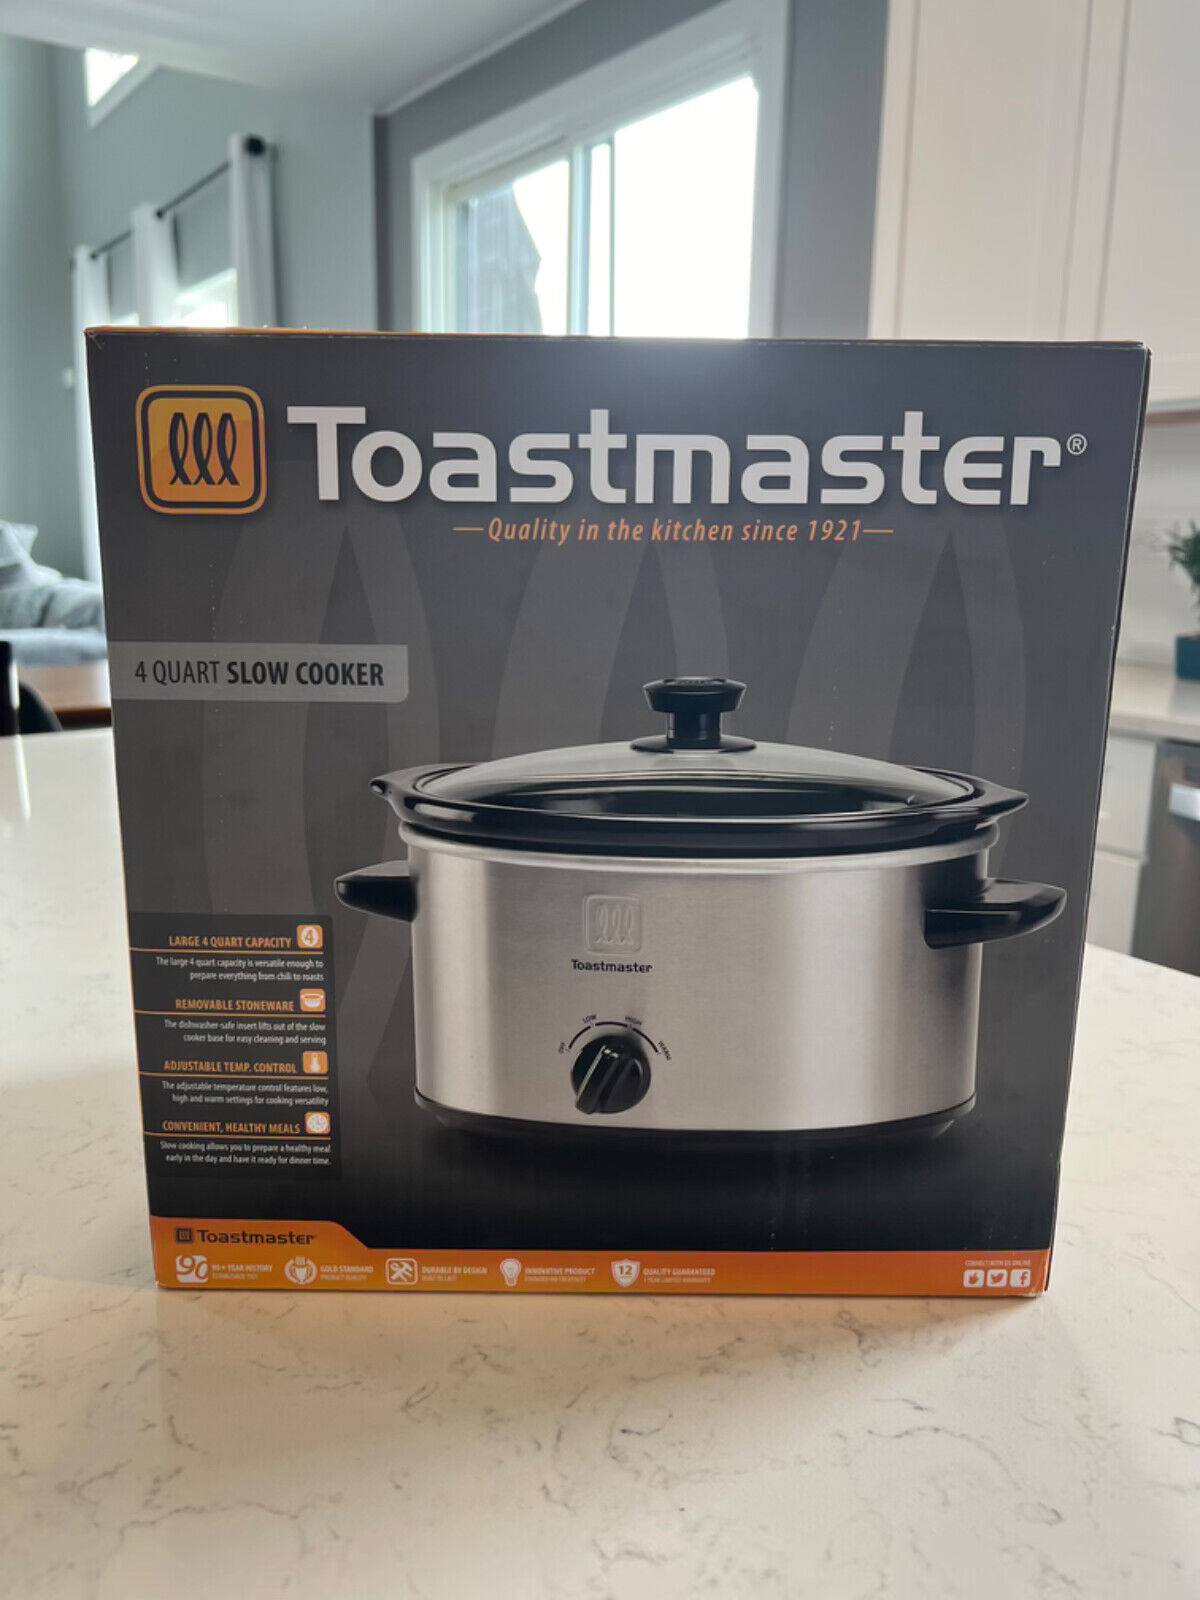 Toastmaster 4 Quart Slow Cooker - New in box